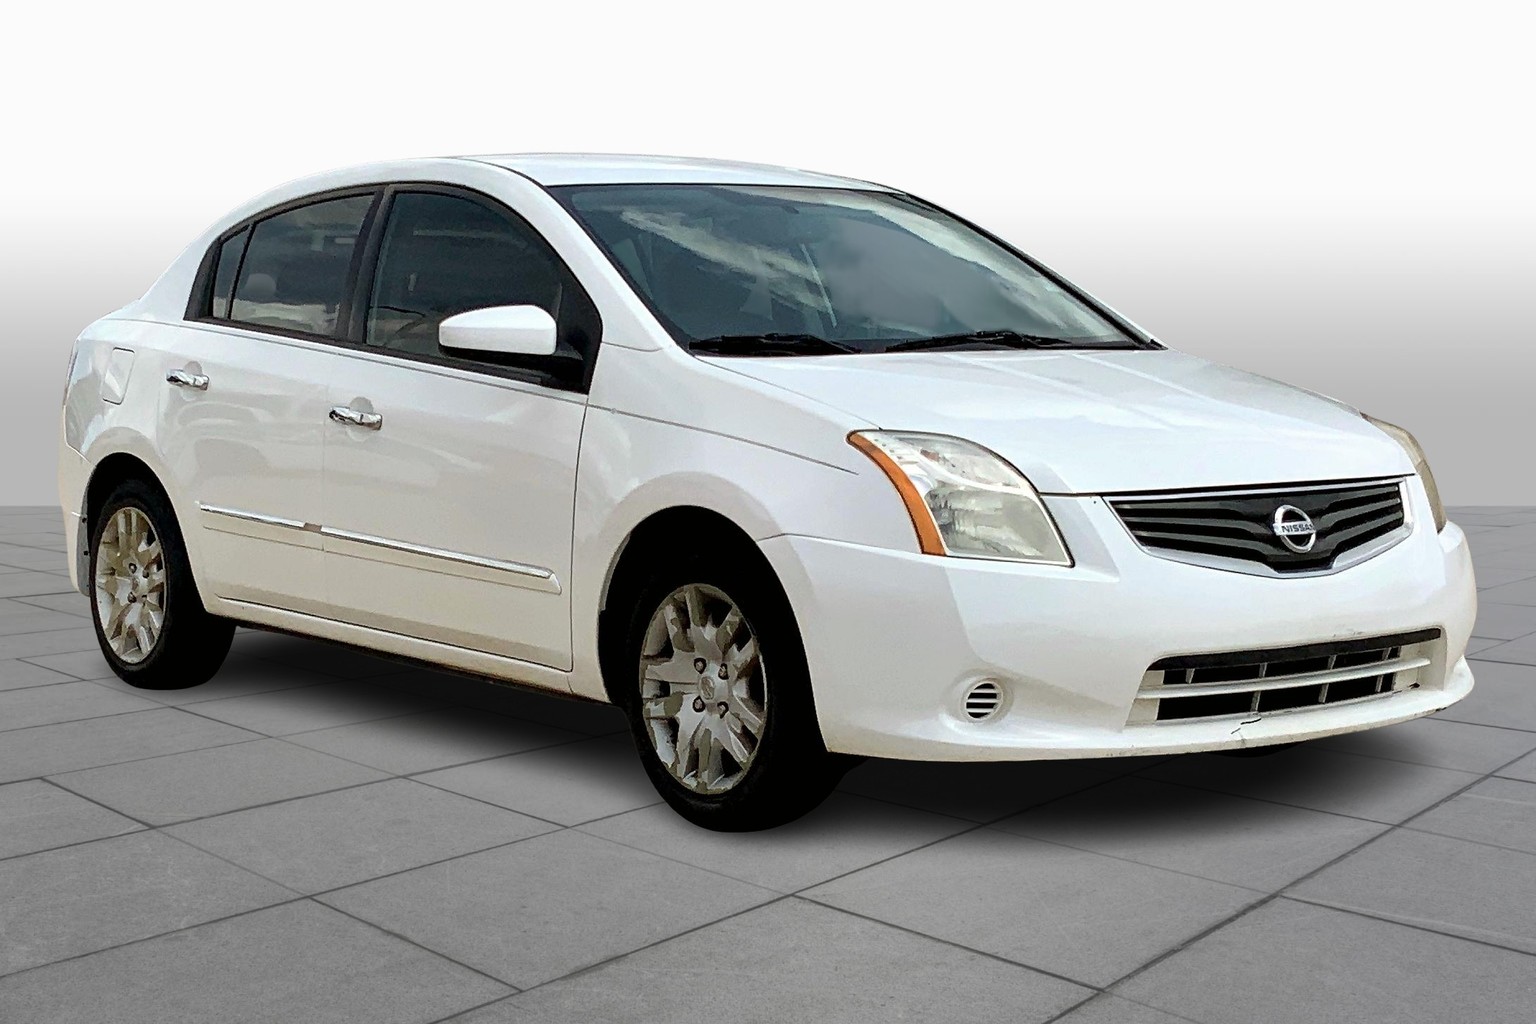 Used 2012 Nissan Sentra S with VIN 3N1AB6APXCL648162 for sale in Tulsa, OK